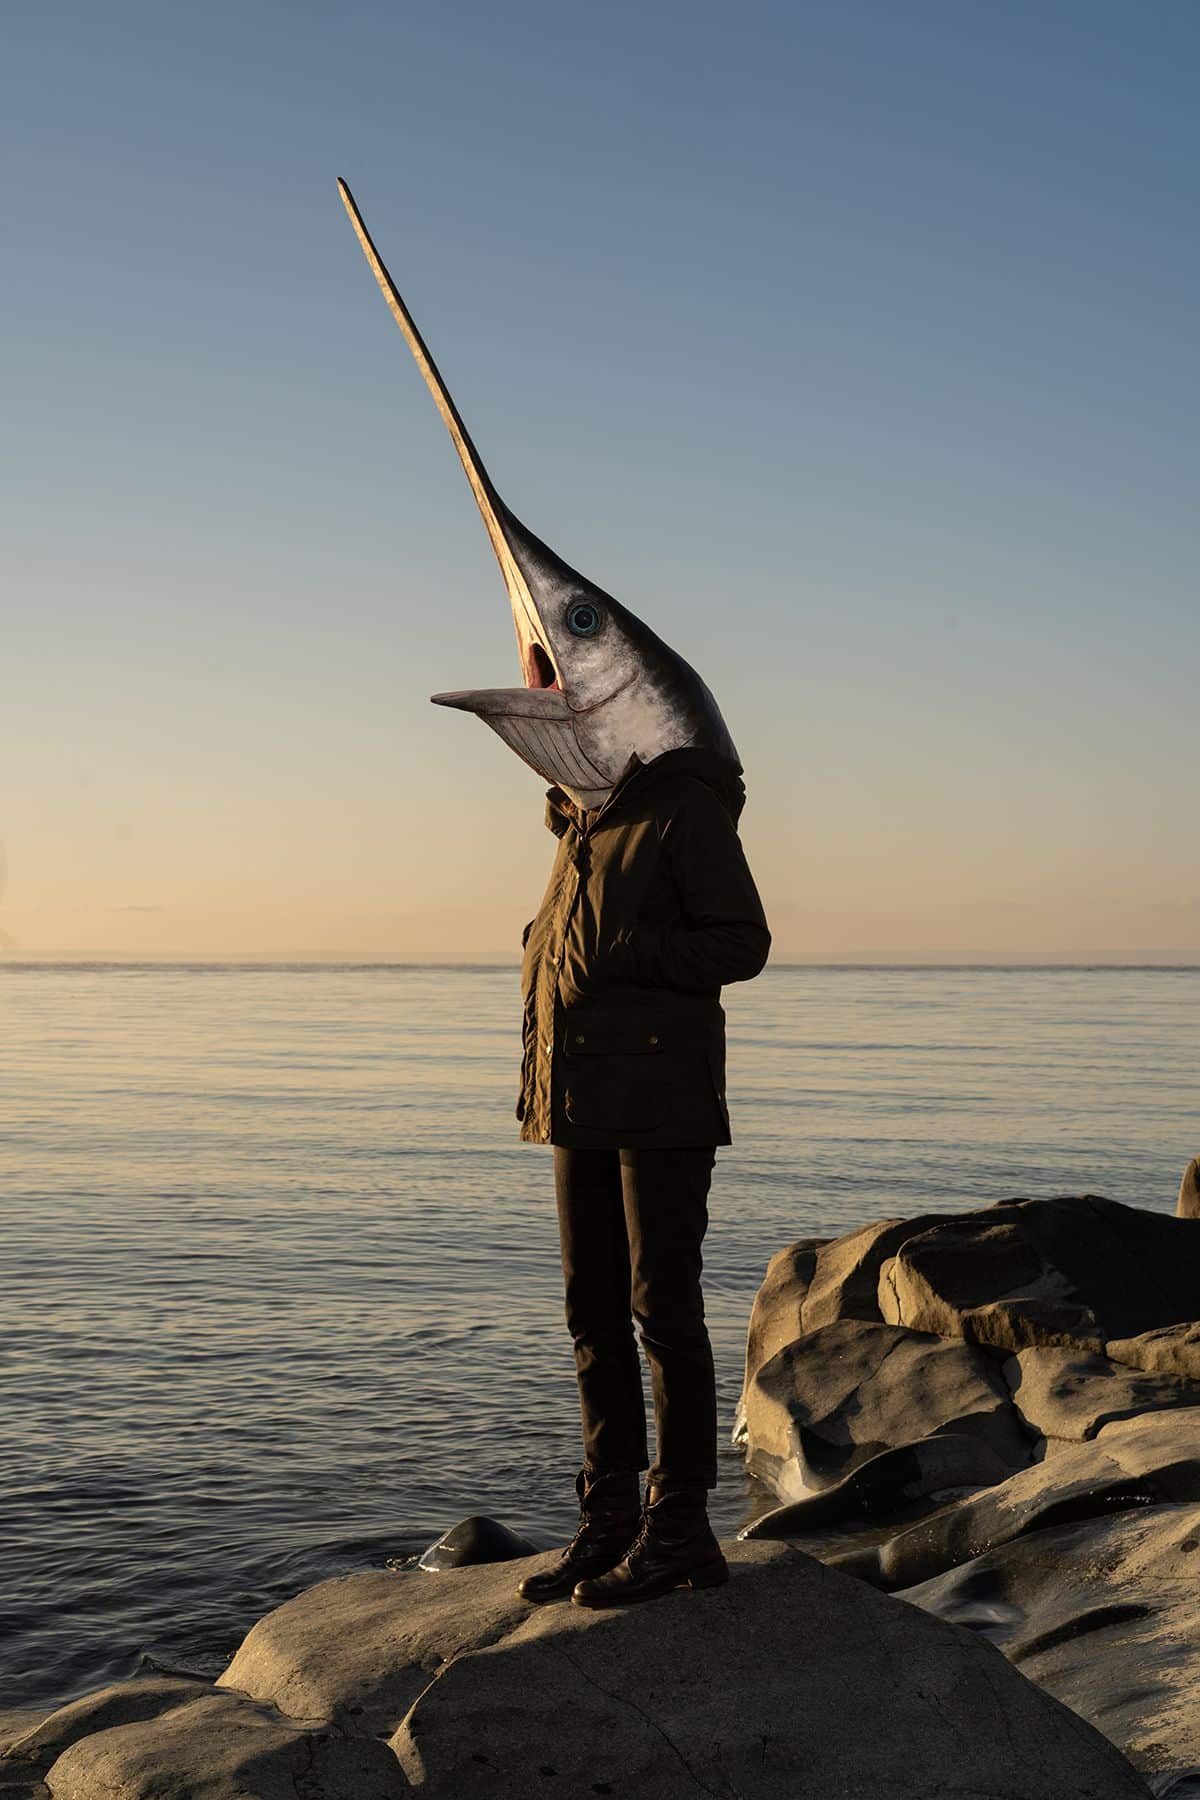 A photo of a person standing on rocks on a seaside wearing a swordfish head on their head